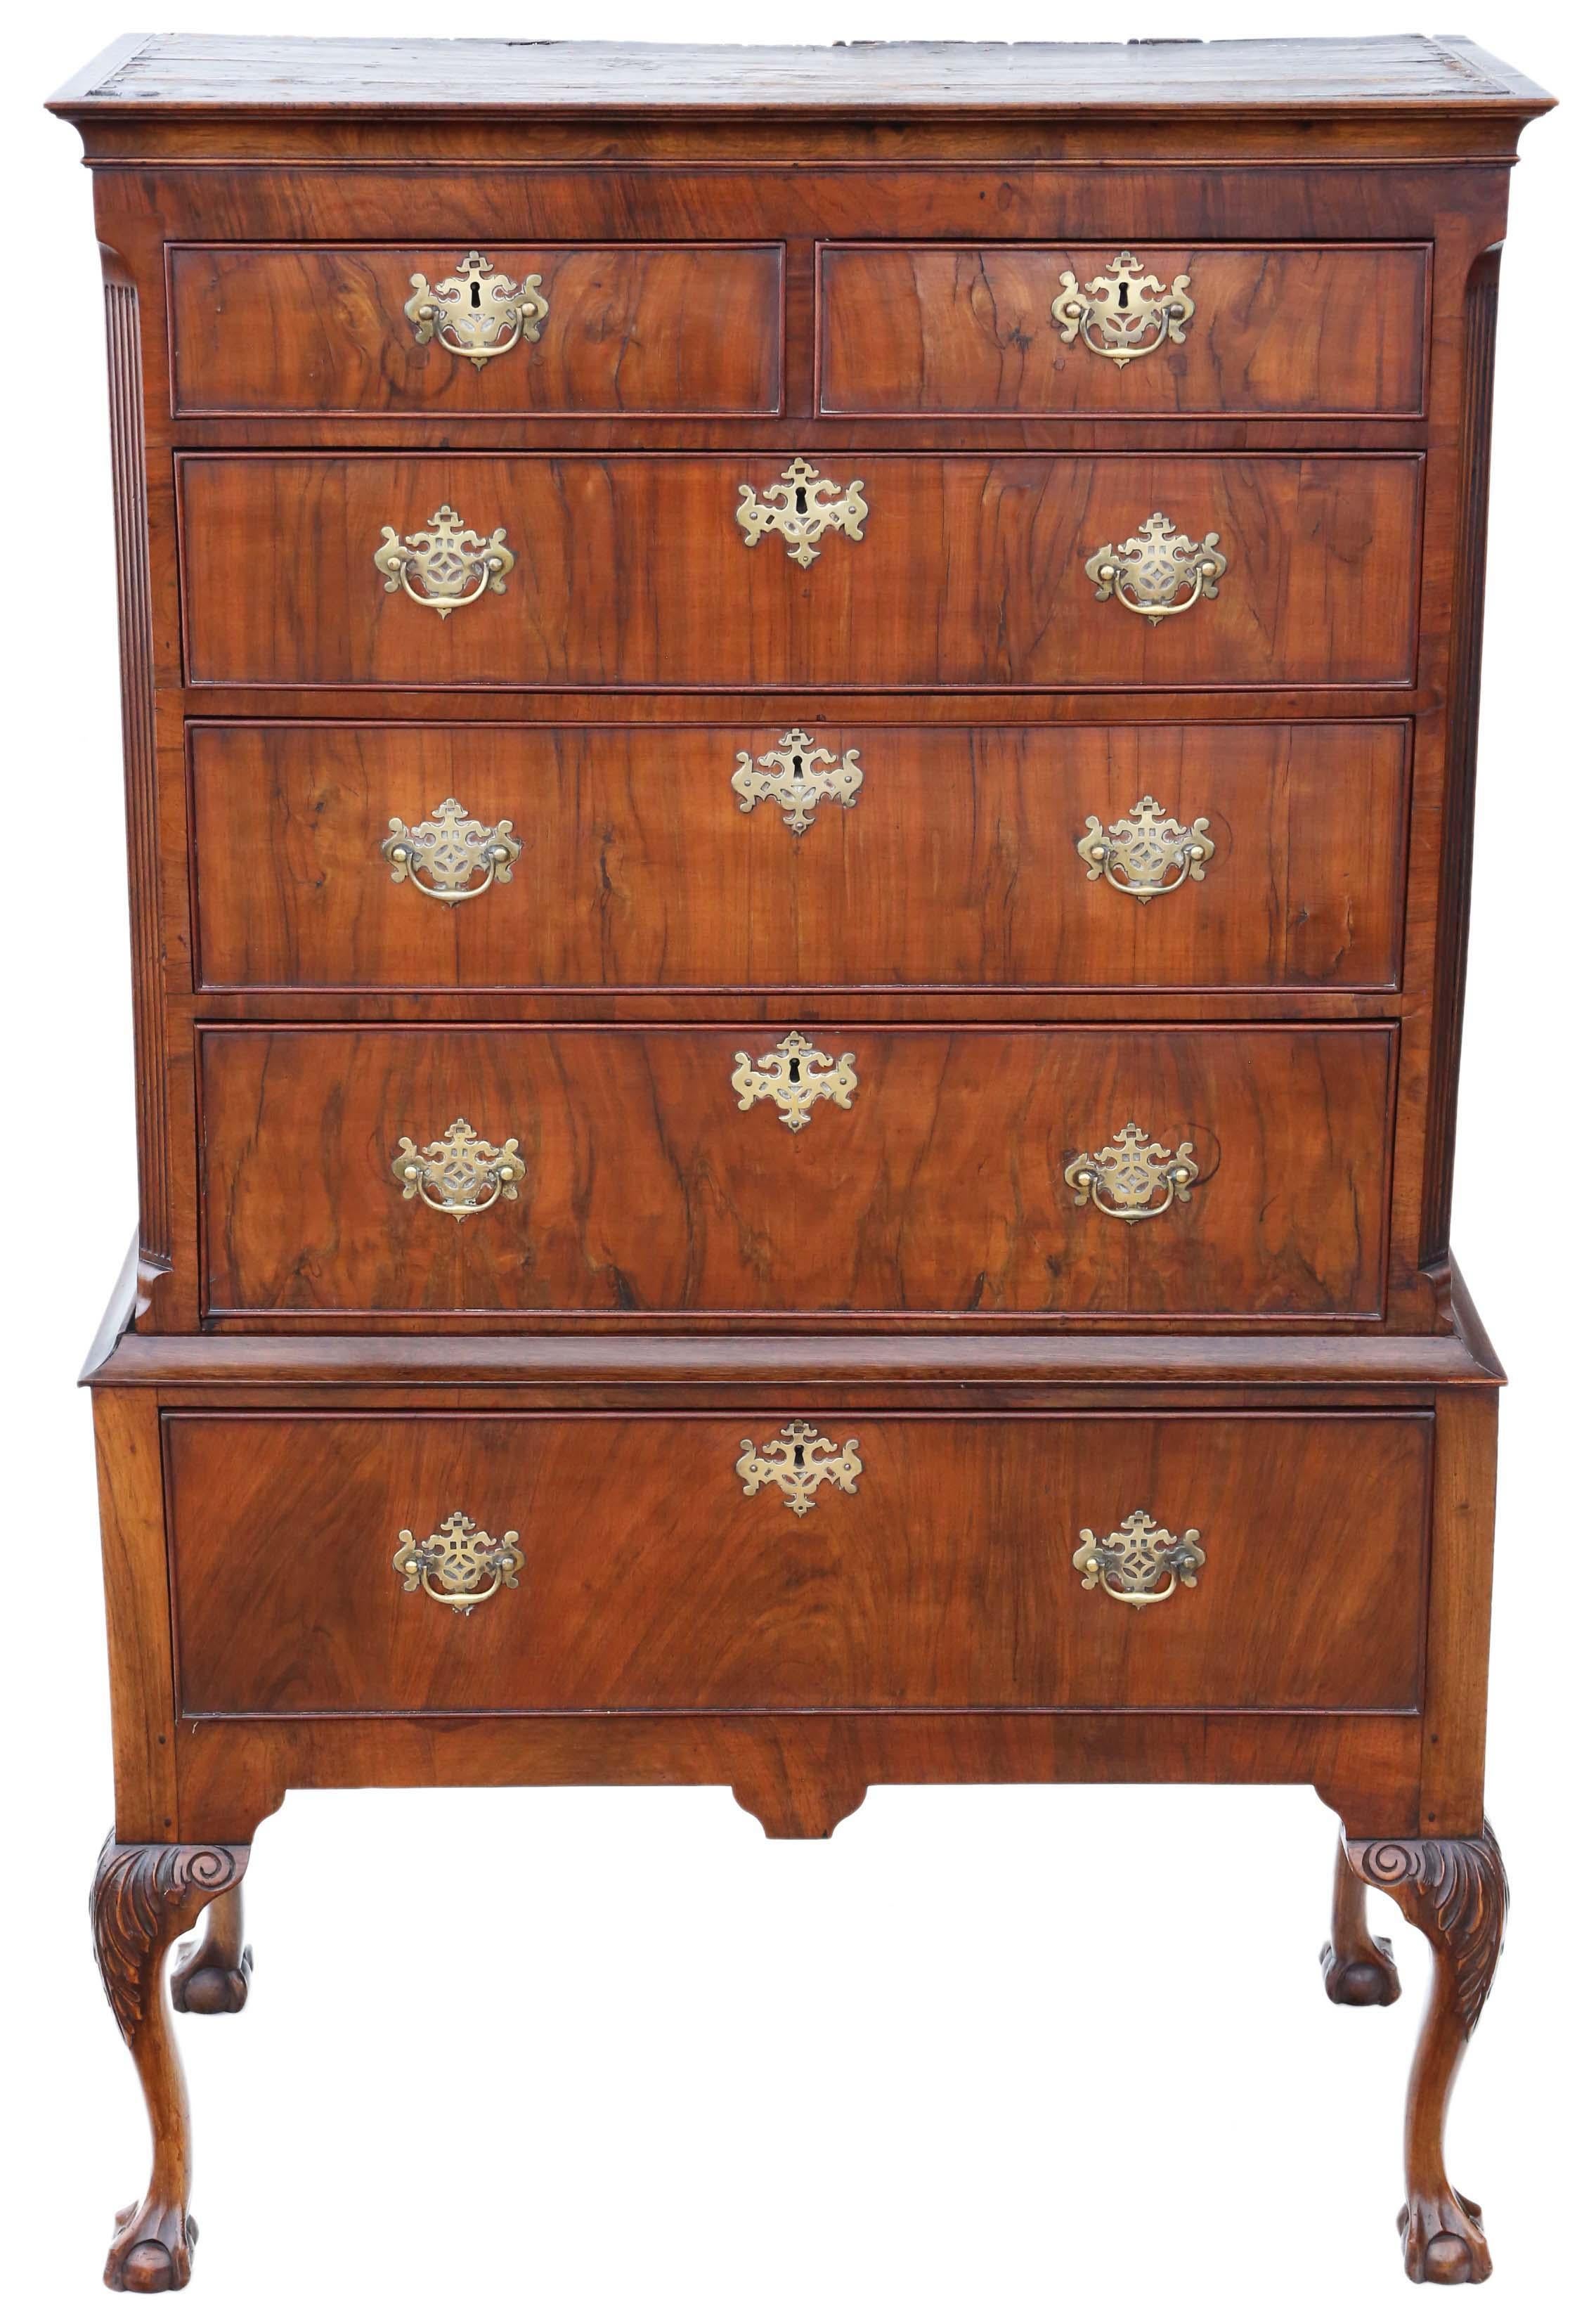 Antique Georgian chest of drawers from the mid-18th century (c. 1750), crafted from figured walnut and placed on a later stand from around 1900.

This chest exudes a delightful mix of age, charm, and character. The oak-lined drawers have no loose